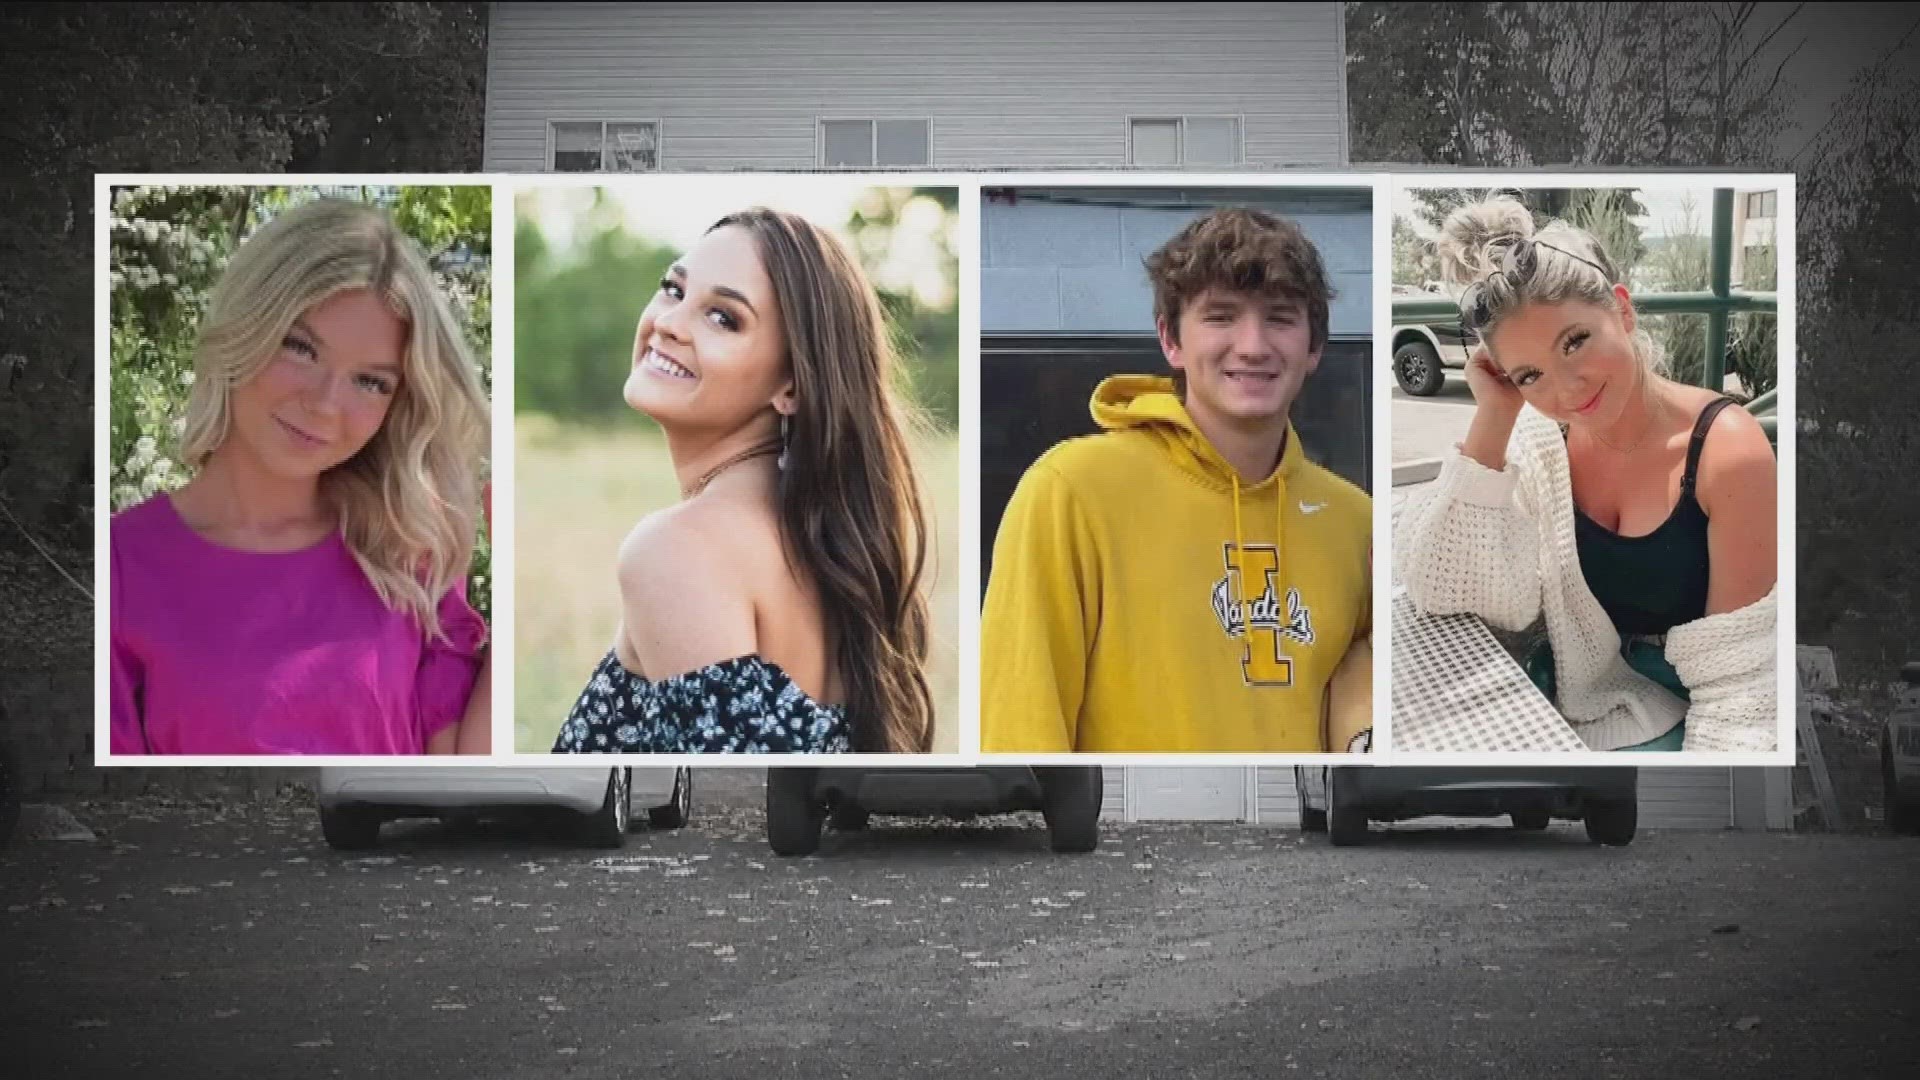 The University of Idaho will award posthumous degrees and certificates on Saturday to Madison Mogen, Kaylee Goncalves, Xana Kernodle and Ethan Chapin.